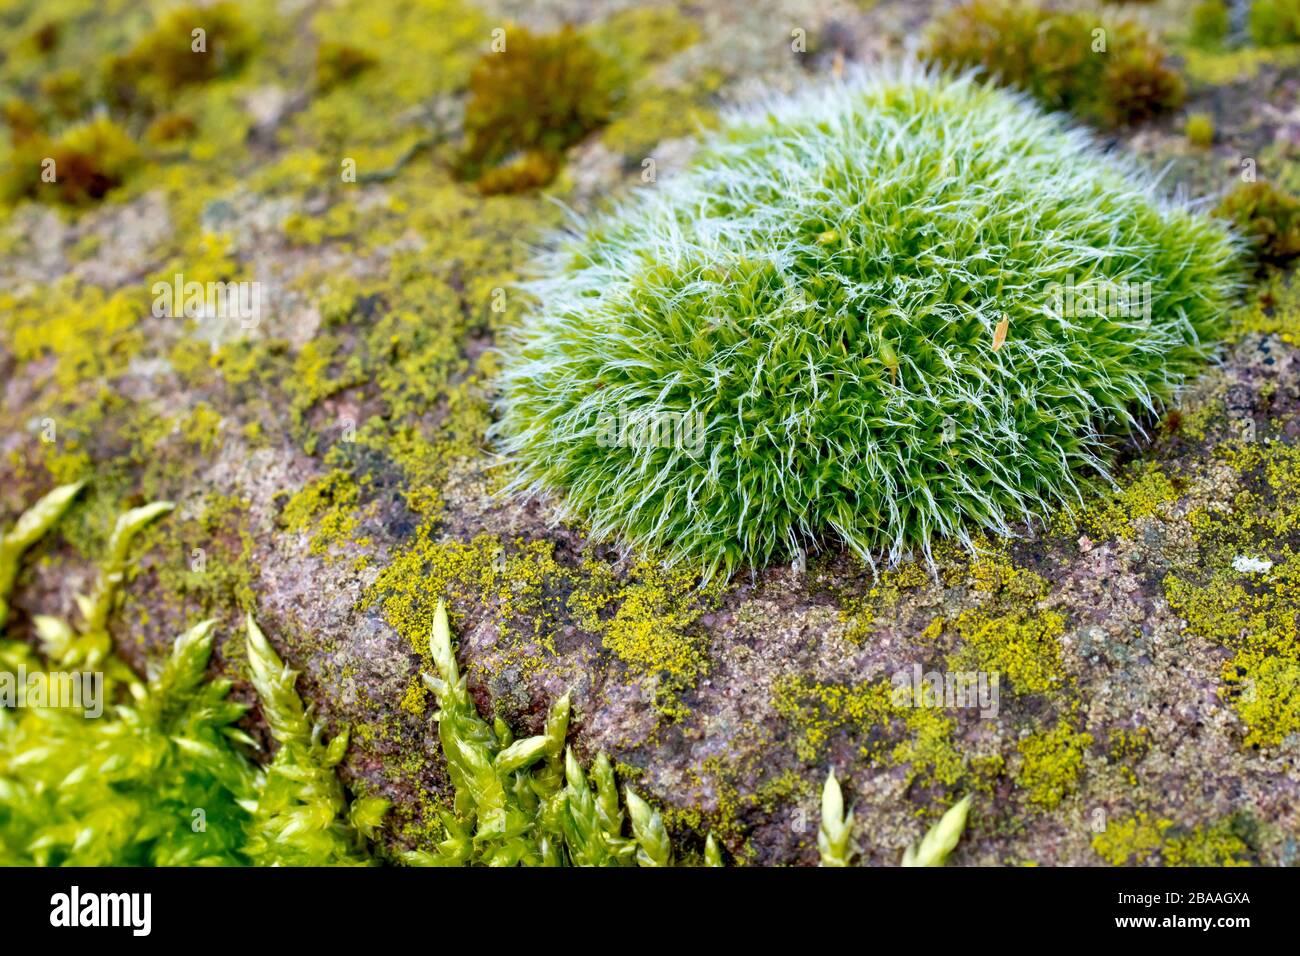 grey-cushioned-grimmia-grimmia-pulvinata-also-known-as-hedgehog-moss-close-up-of-a-single-tuft-of-the-moss-at-the-edge-of-a-sandstone-block-2BAAGXA.jpg